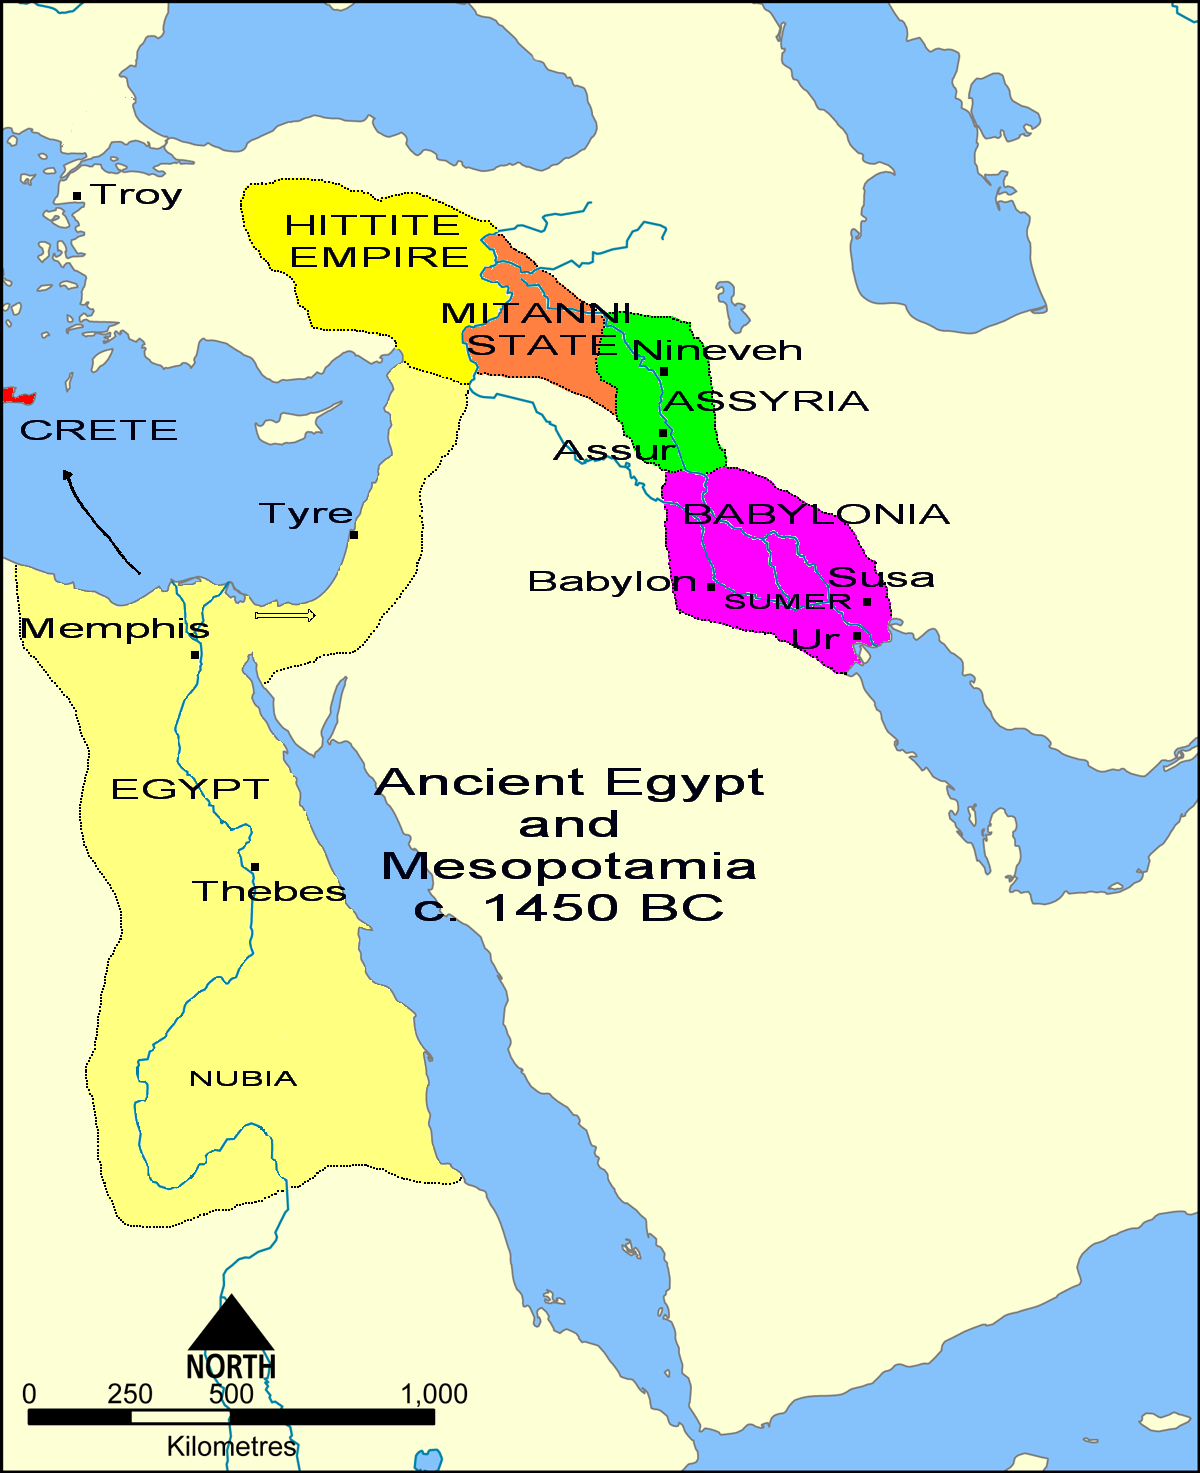 How does the current map of Mesopotamia compare to its ancient form?